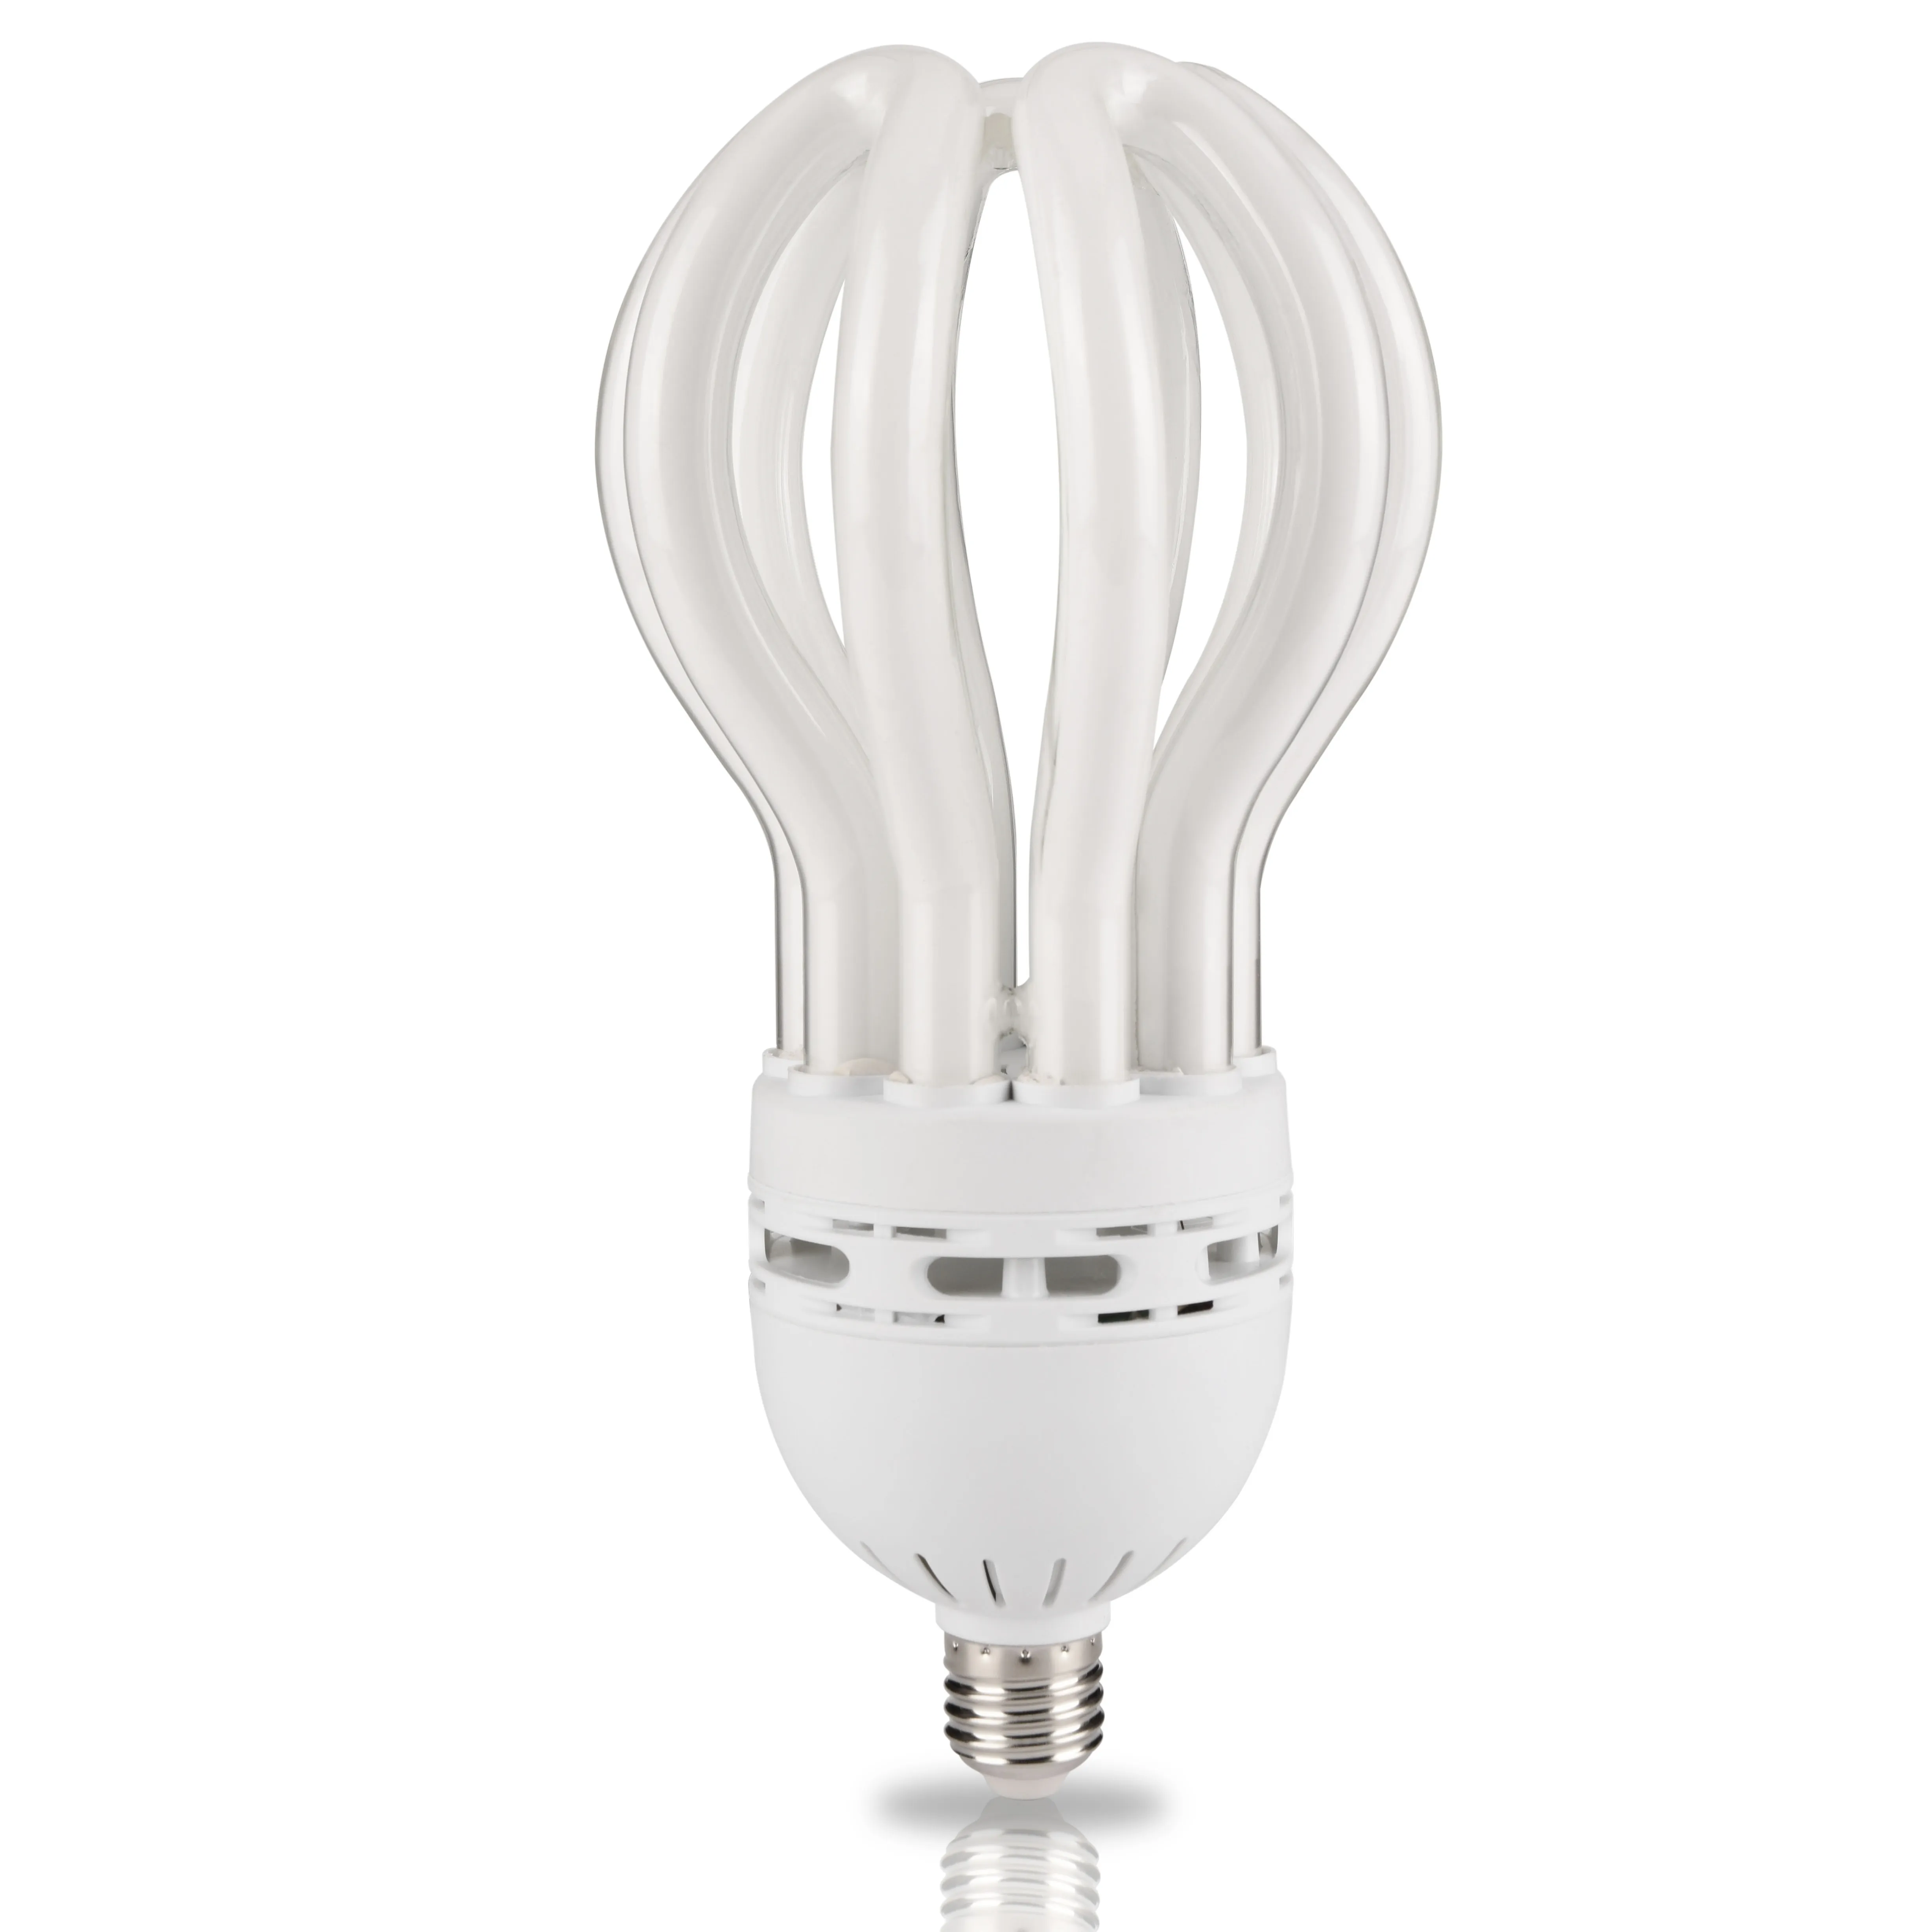 china golden supplier 5U 125W  lotus energy saving bulb with high lumen and high quality products